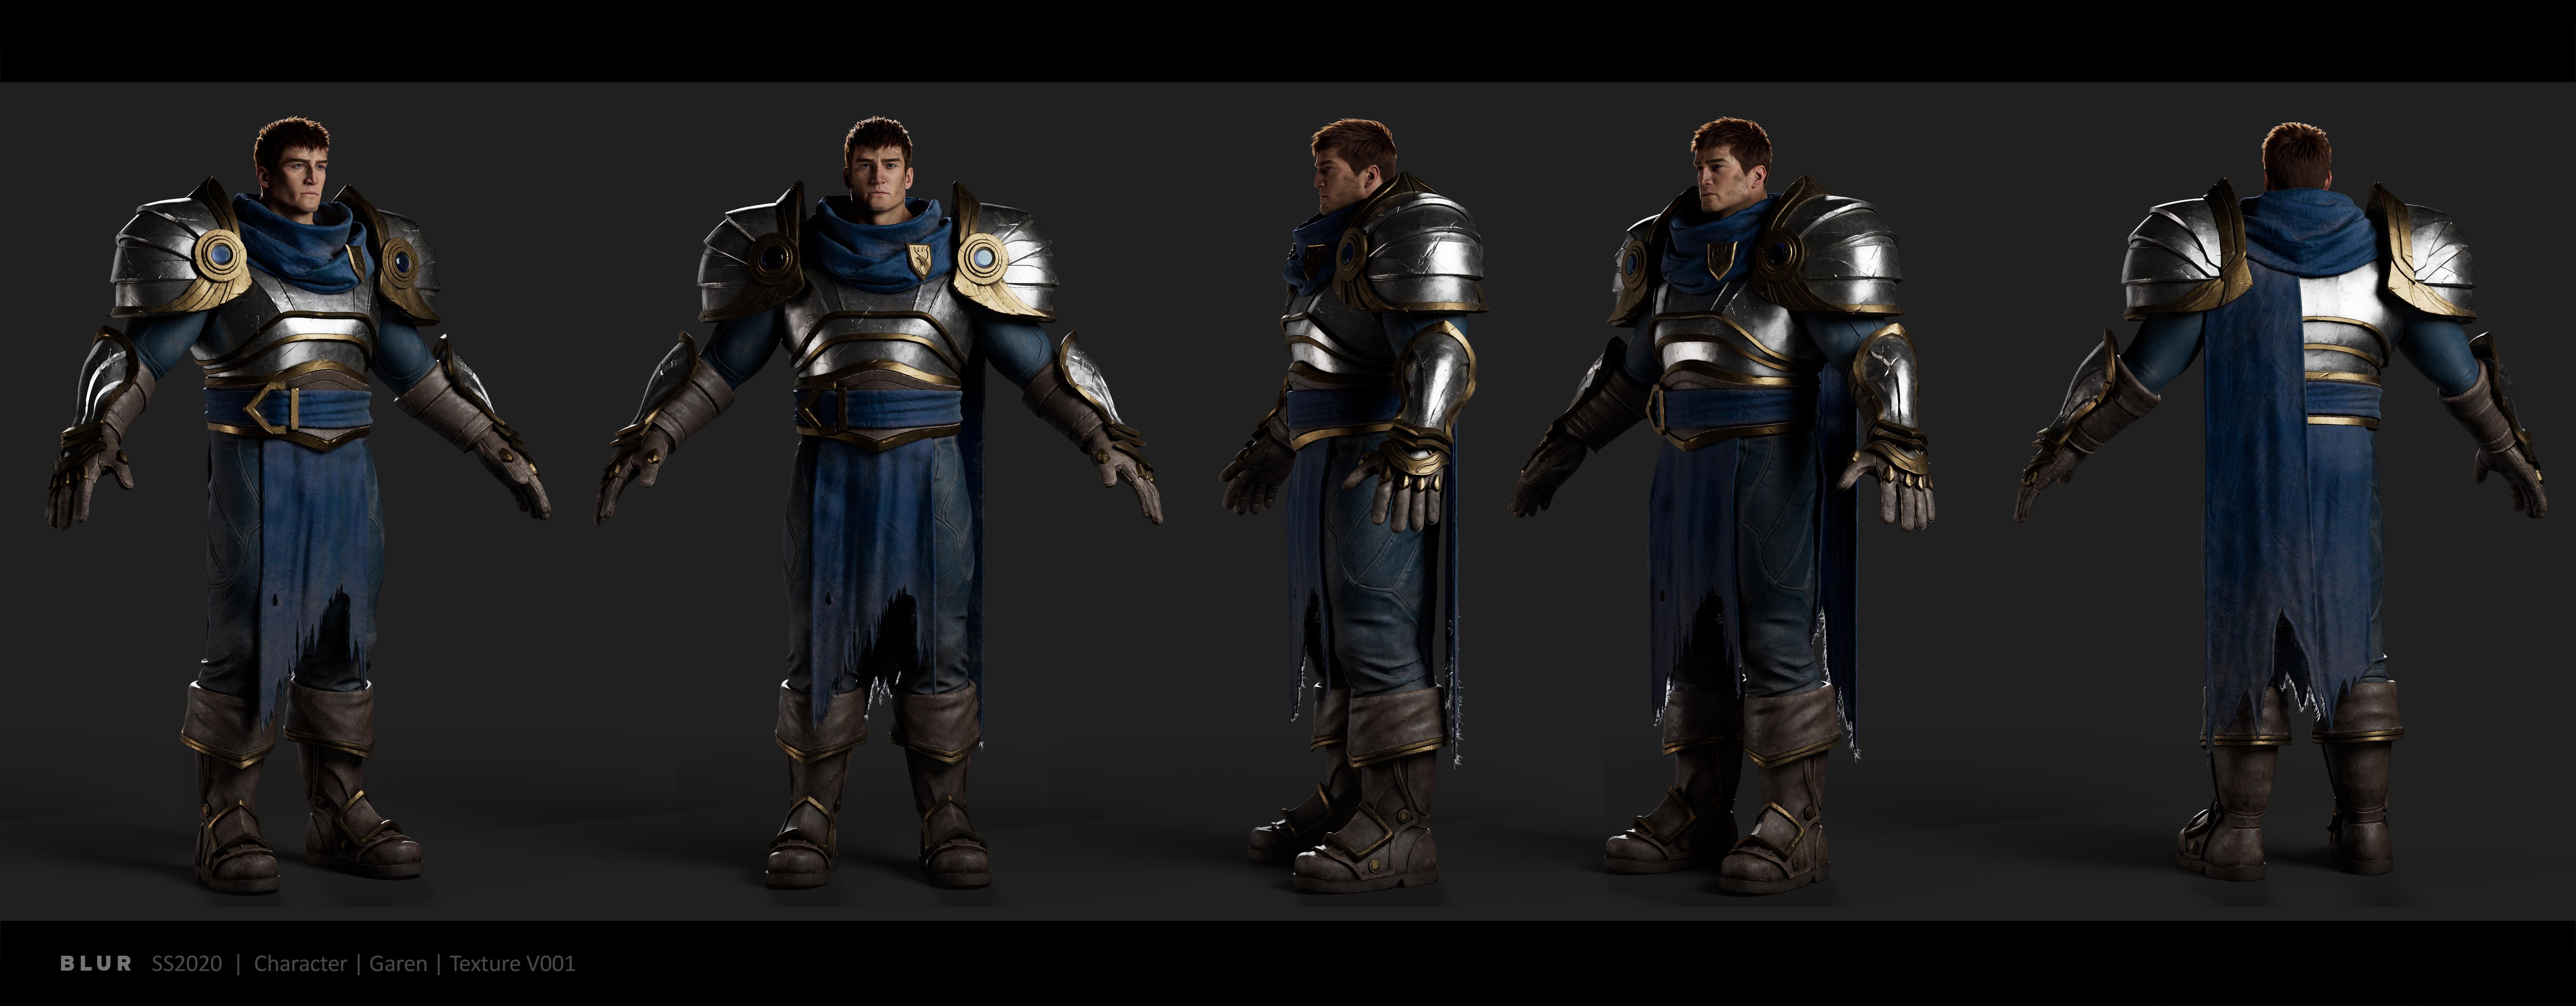 League Of Legends 3D Models From Riot for Fans! (Free